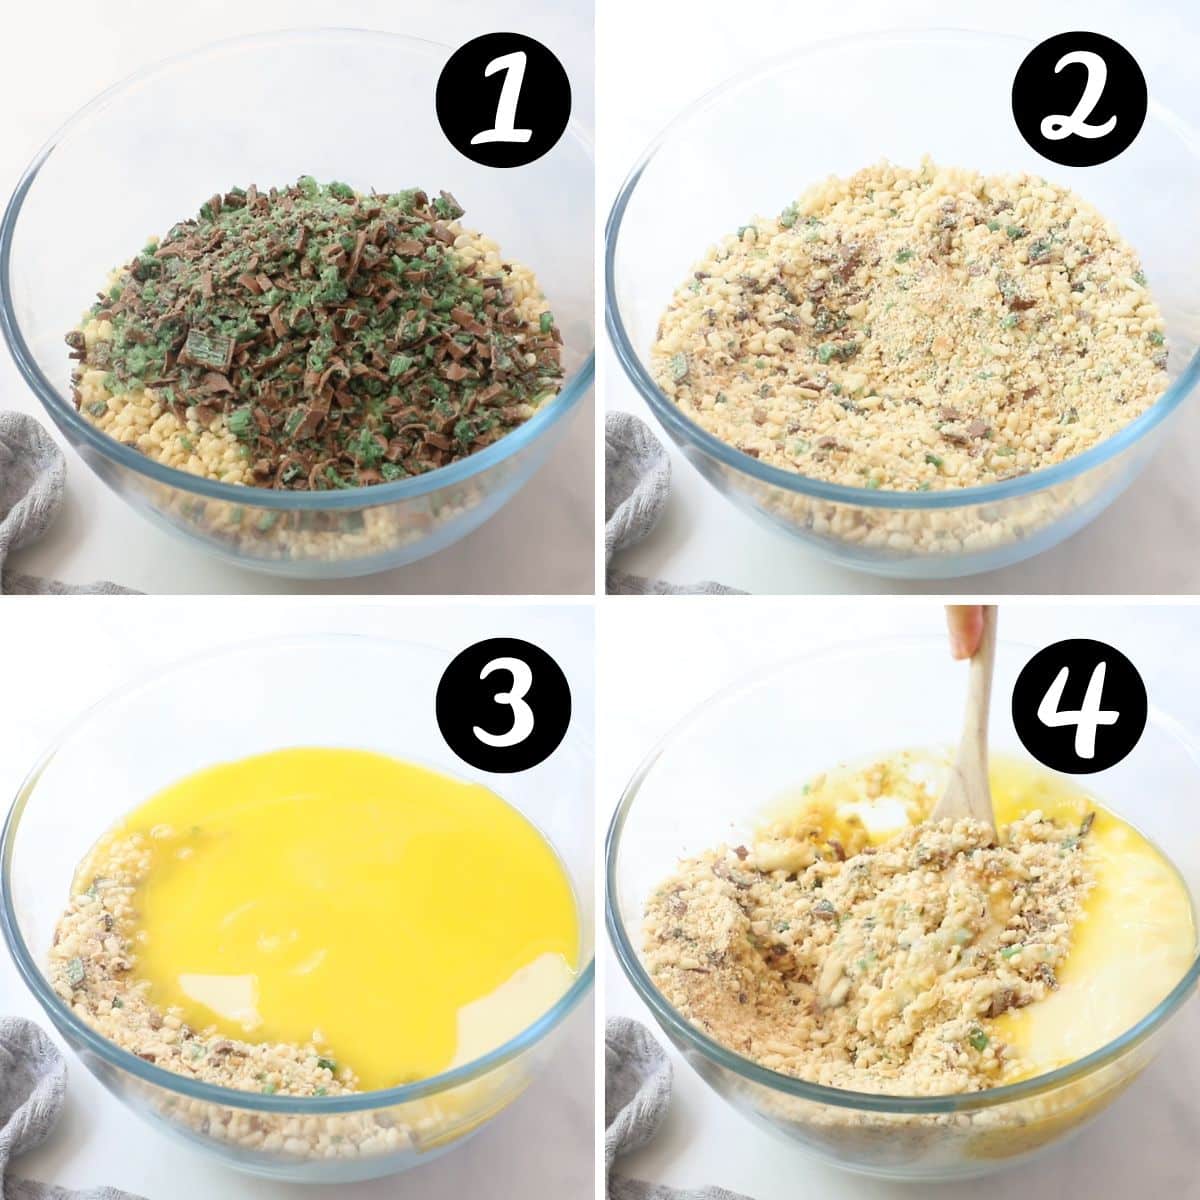 biscuit base ingredients being mixed in a bowl.